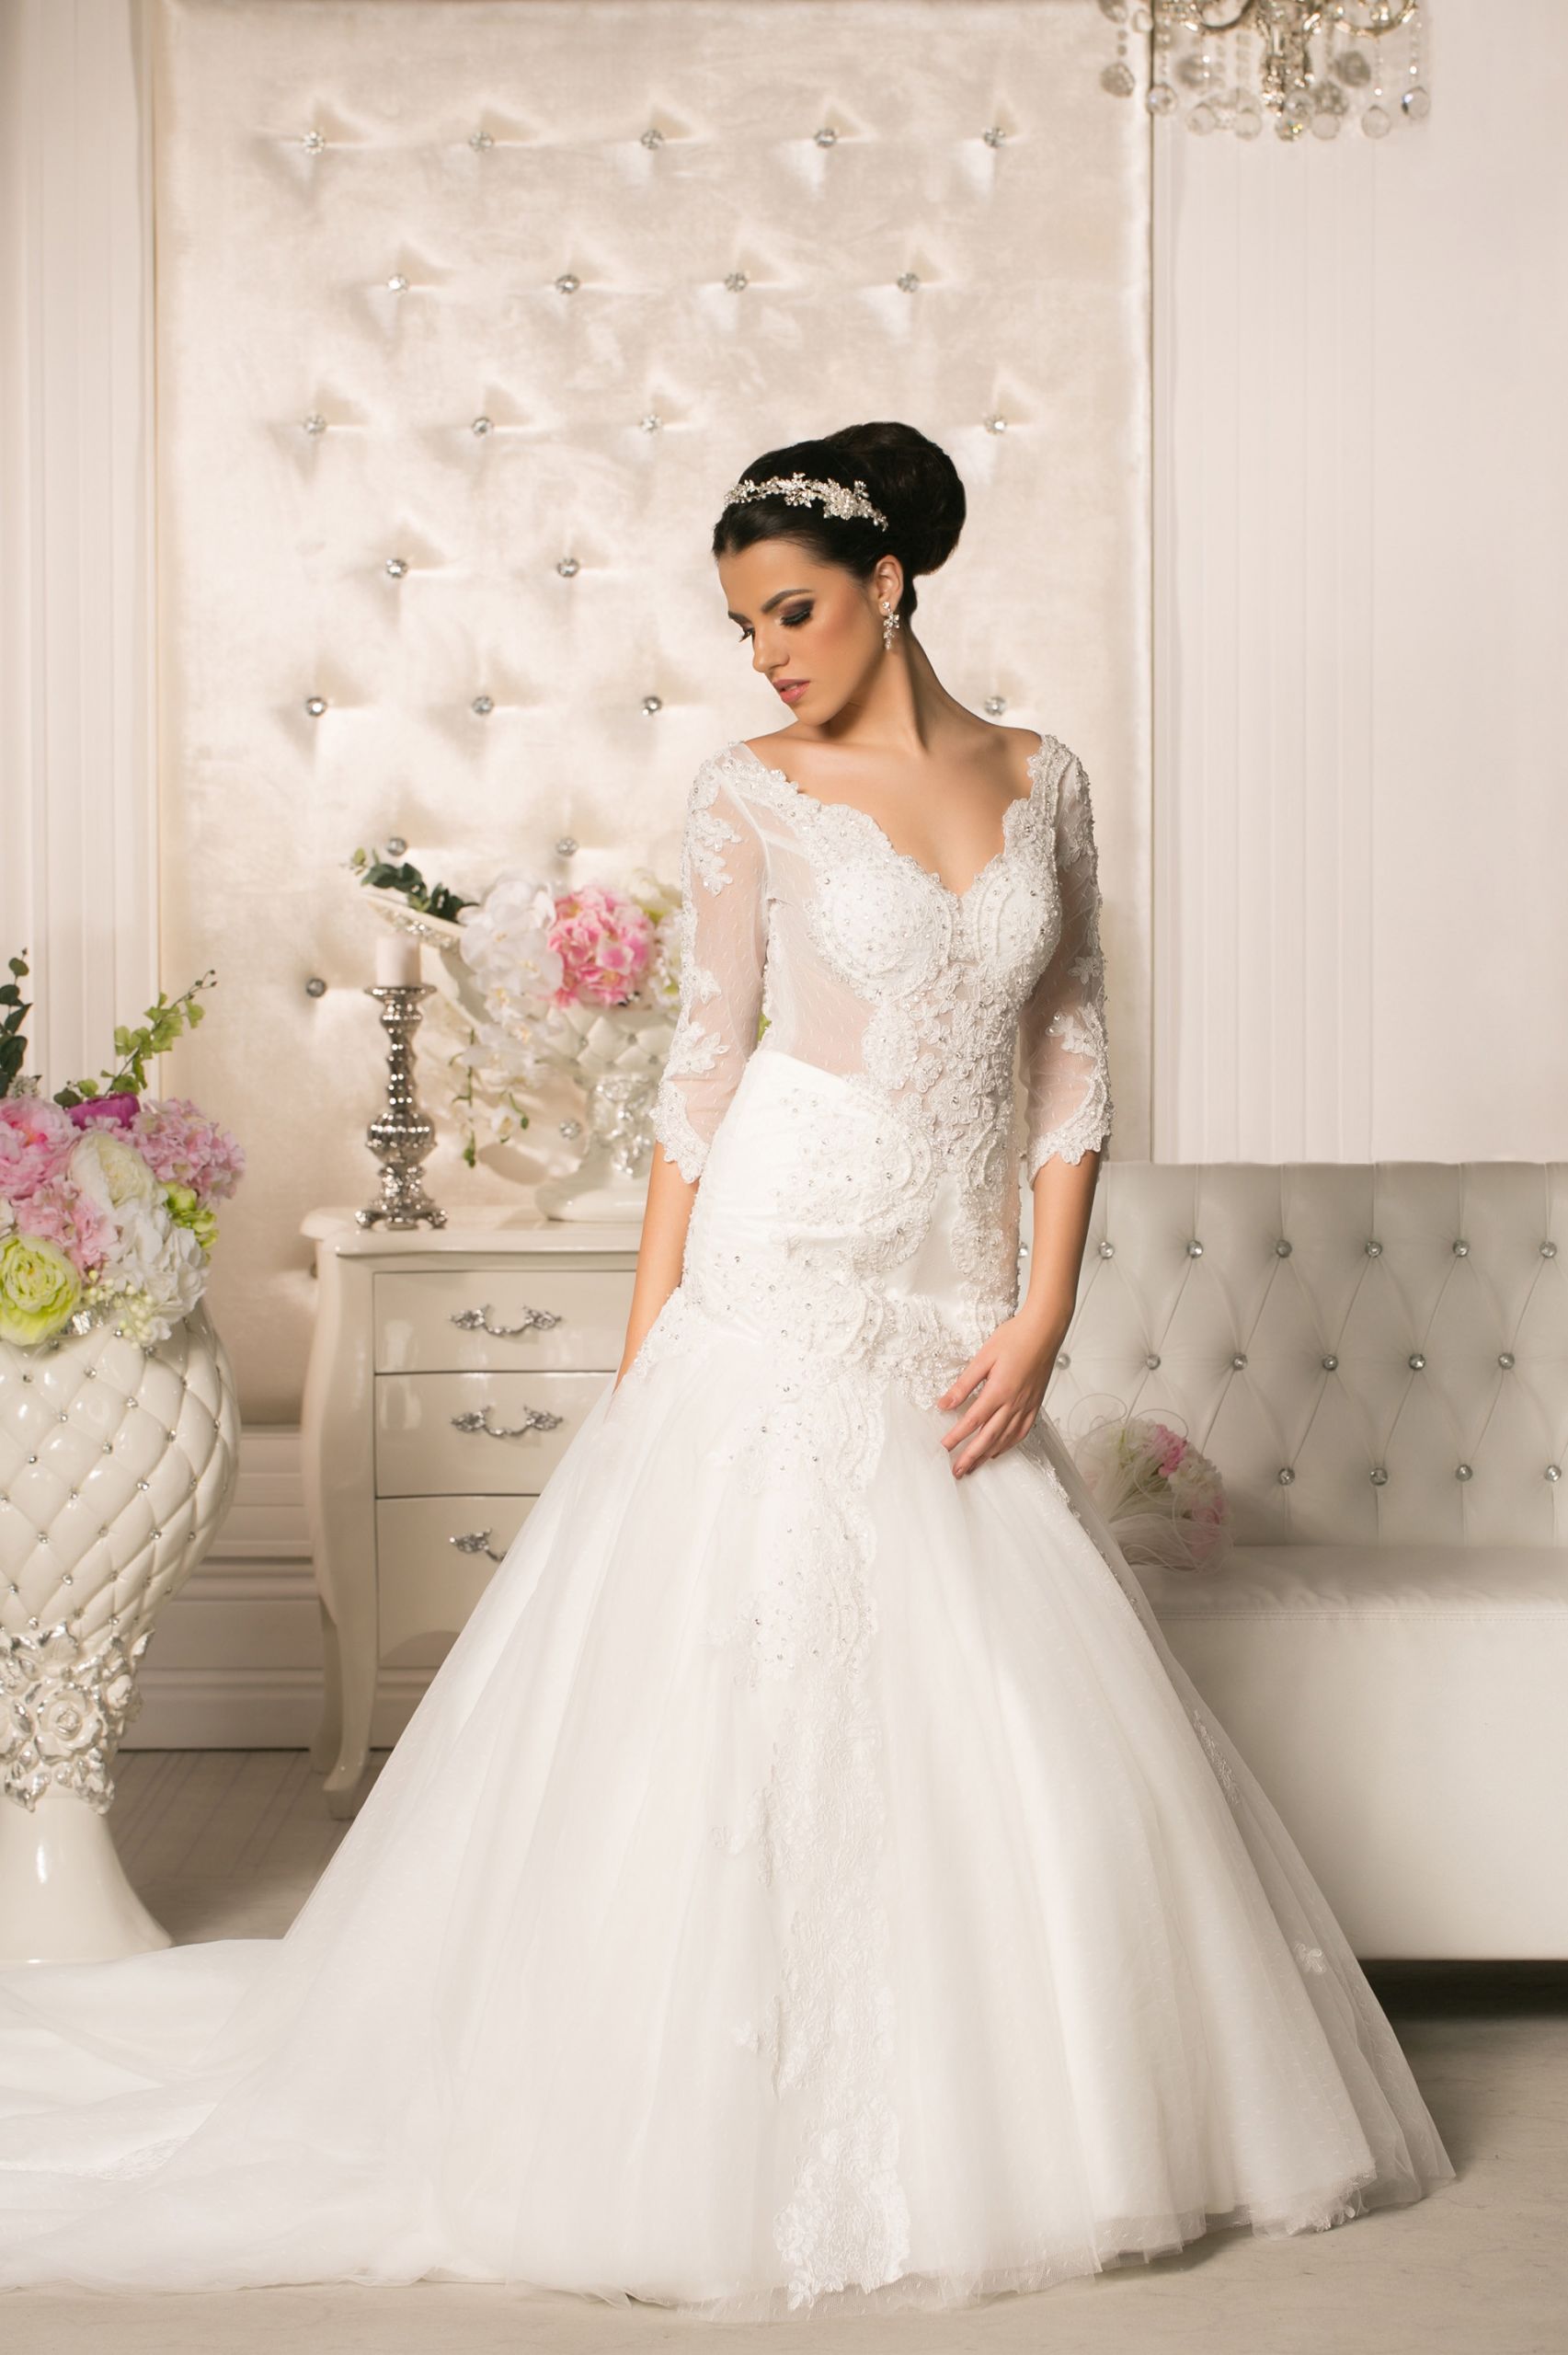 Wedding Gown Alterations
 Best Dry Cleaners NYC Wedding Dress Alterations NYC